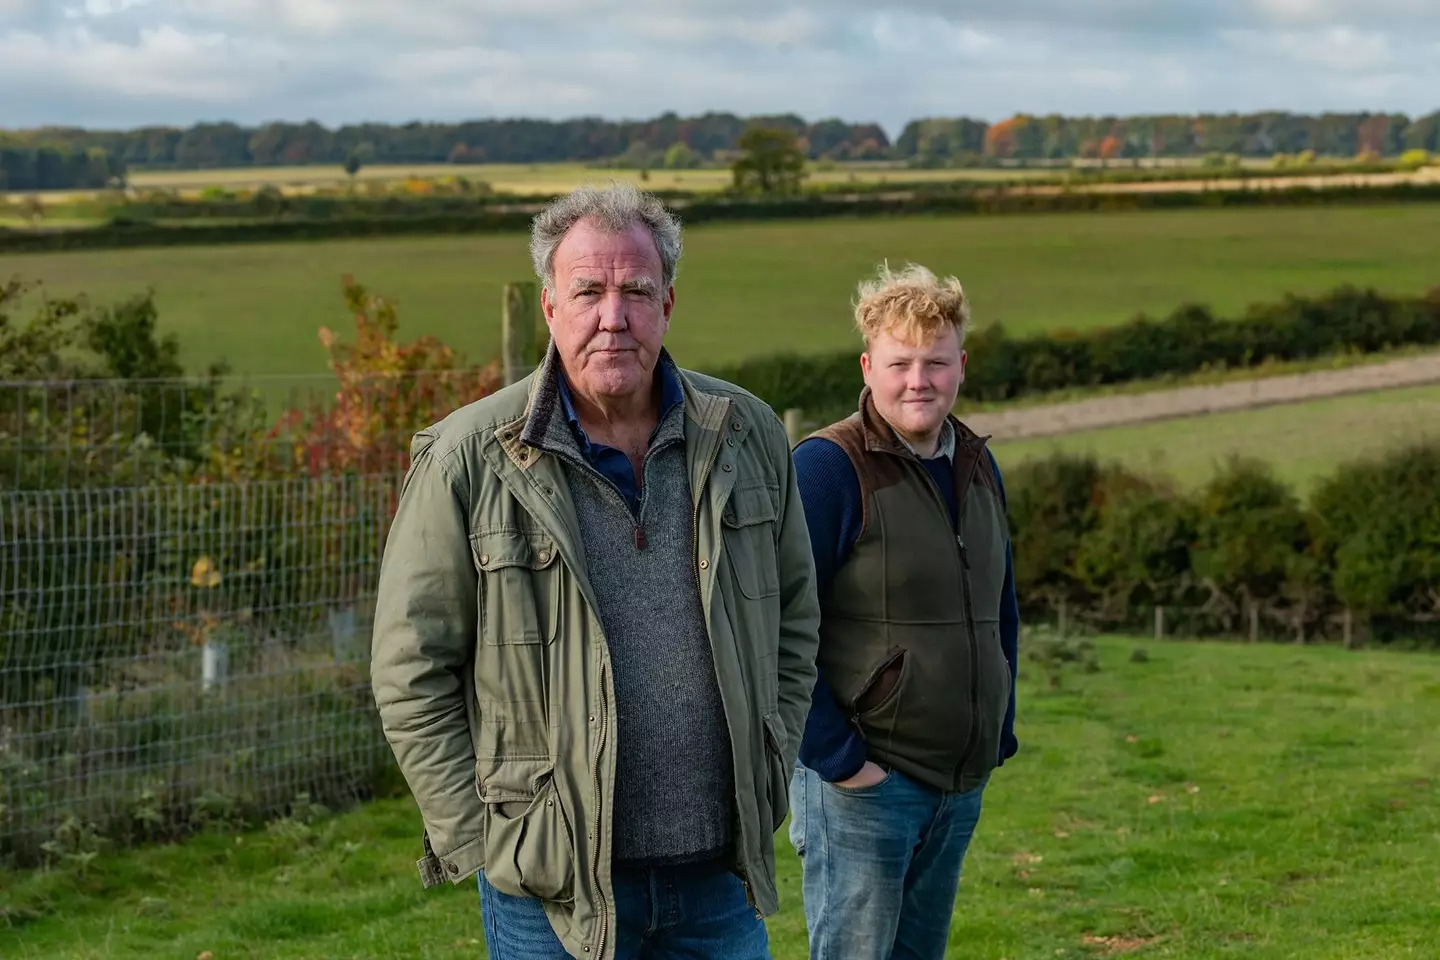 Kaleb Cooper and Jeremy Clarkson together on the farm (Amazon Prime Video)